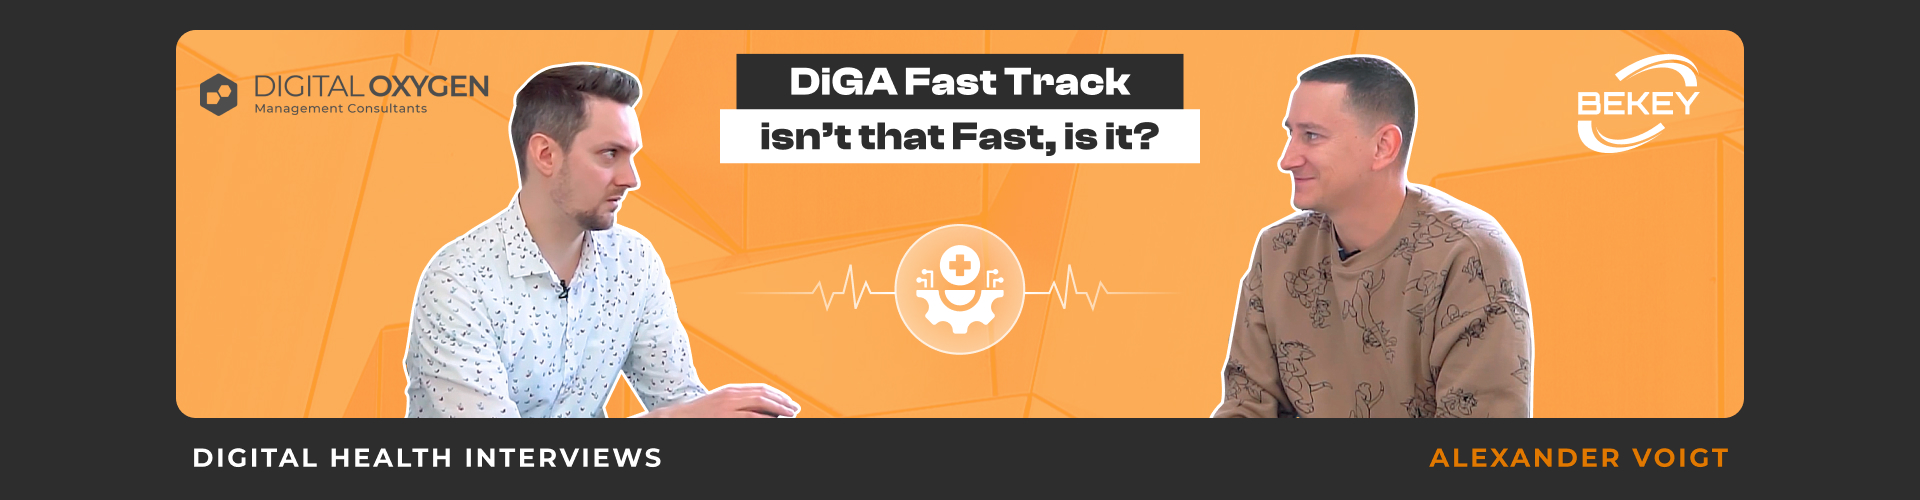 DiGA Fast Track Isn’t That Fast, Is It? Digital Health Interviews: Alexander Voigt - image